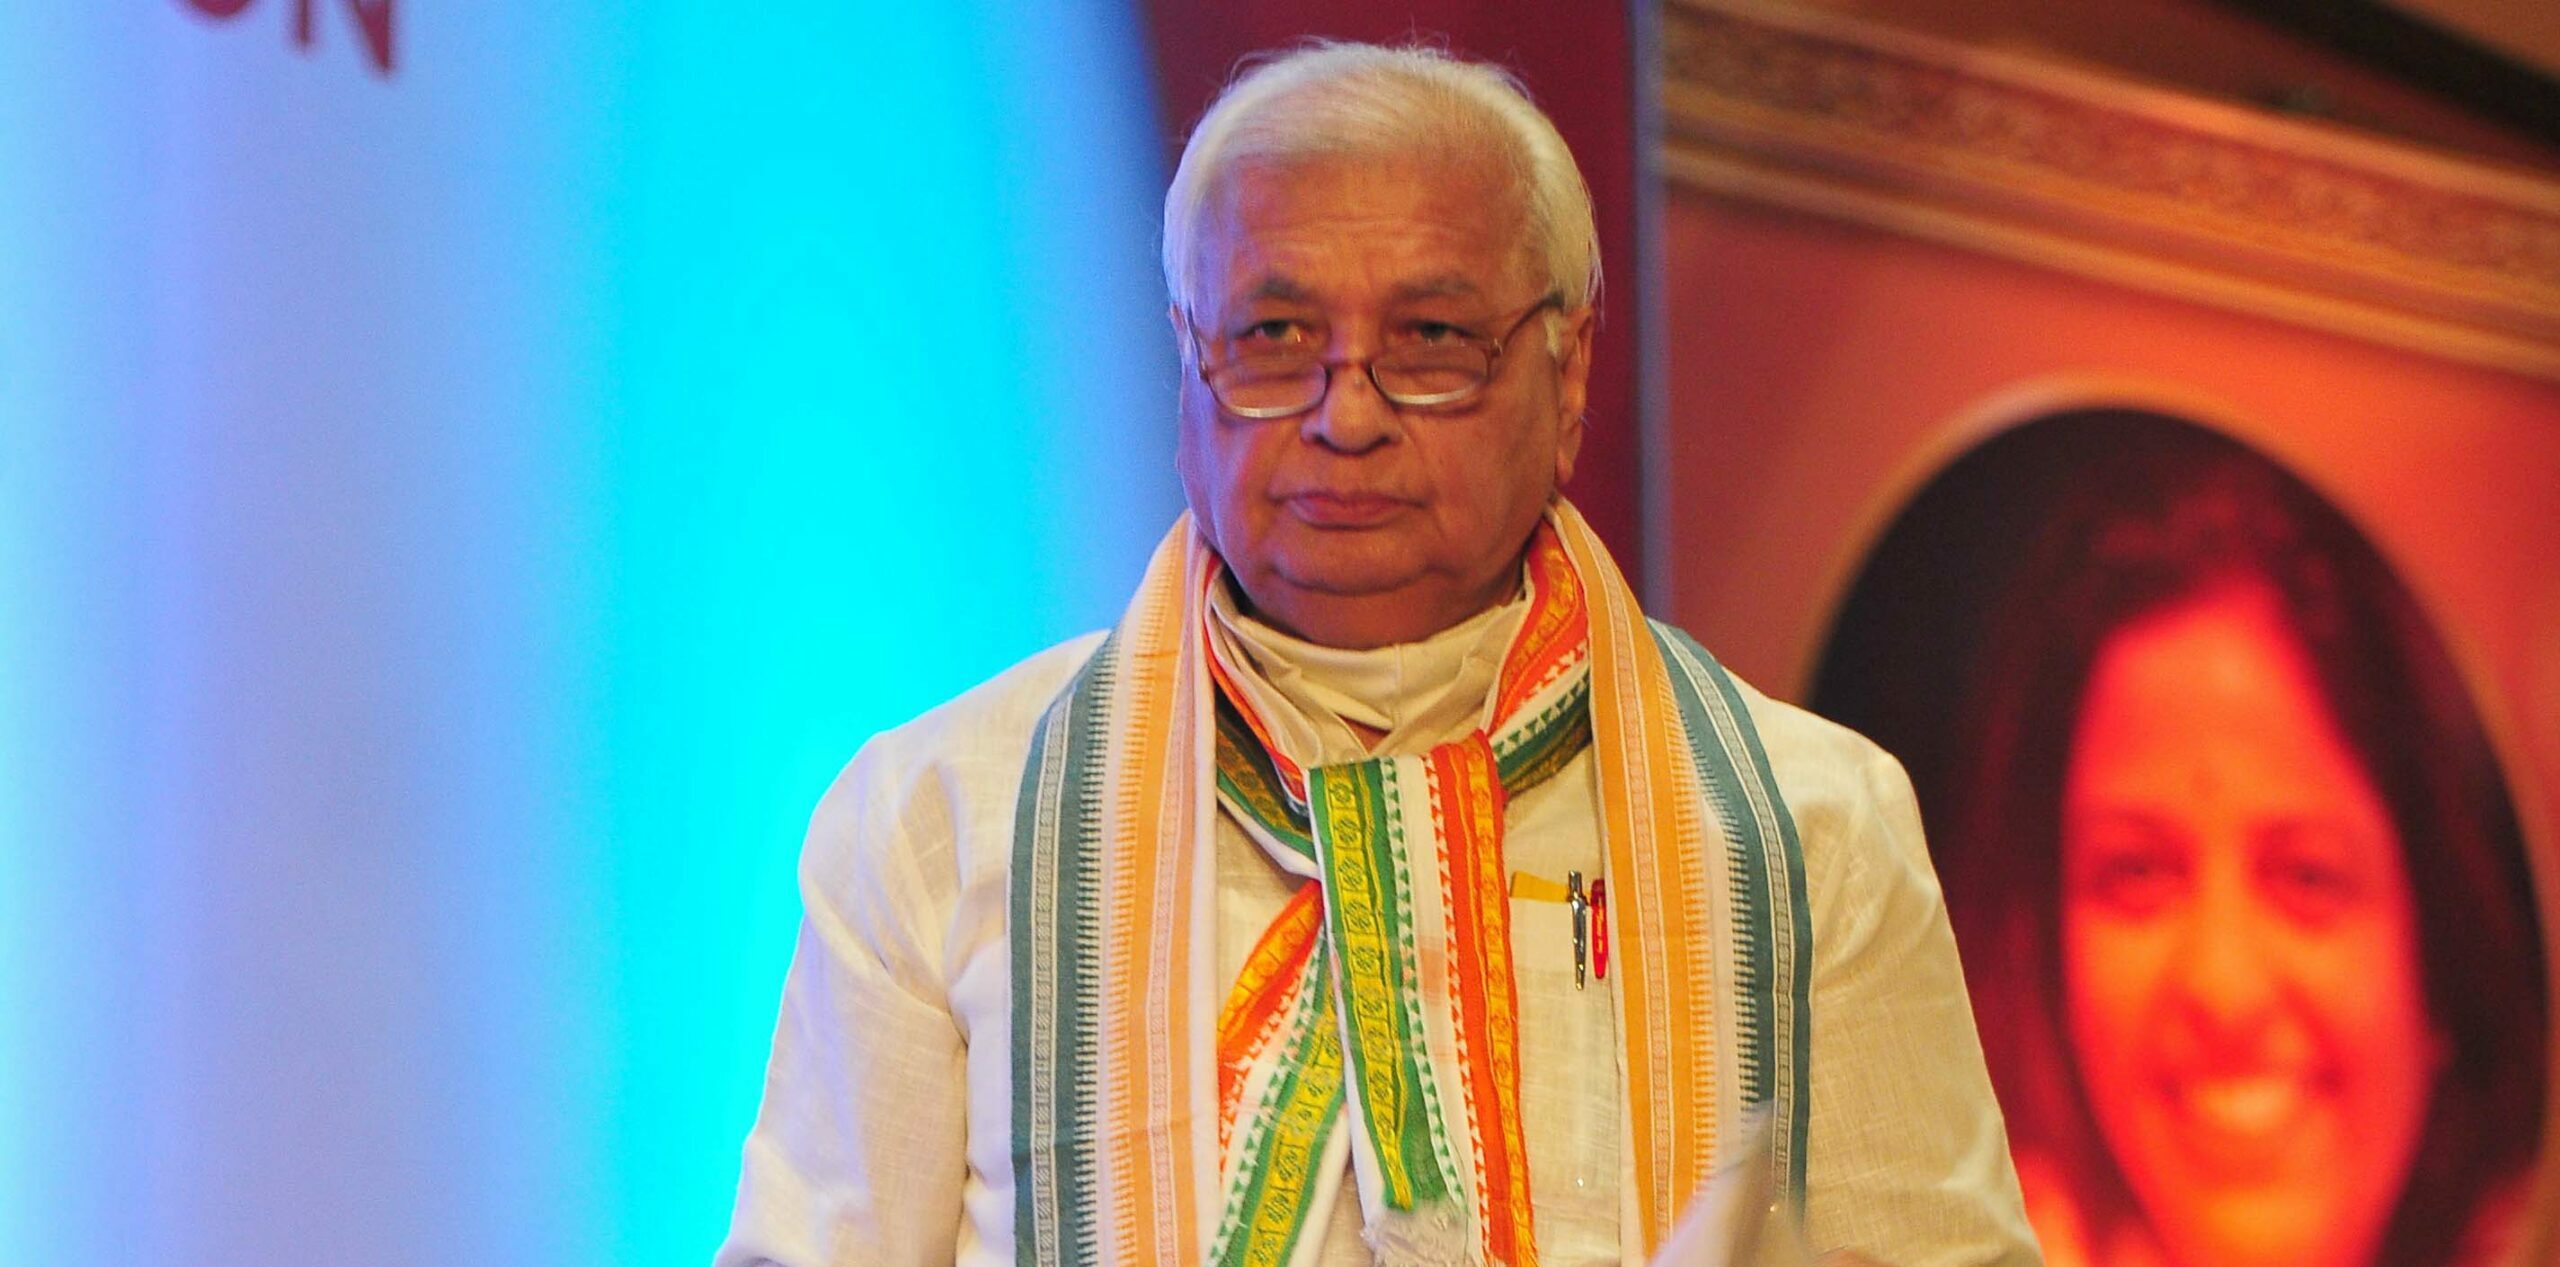 Kerala Governor Arif Mohammad Khan seeks evidence on crisis caused by him, says he acts according to Constitution